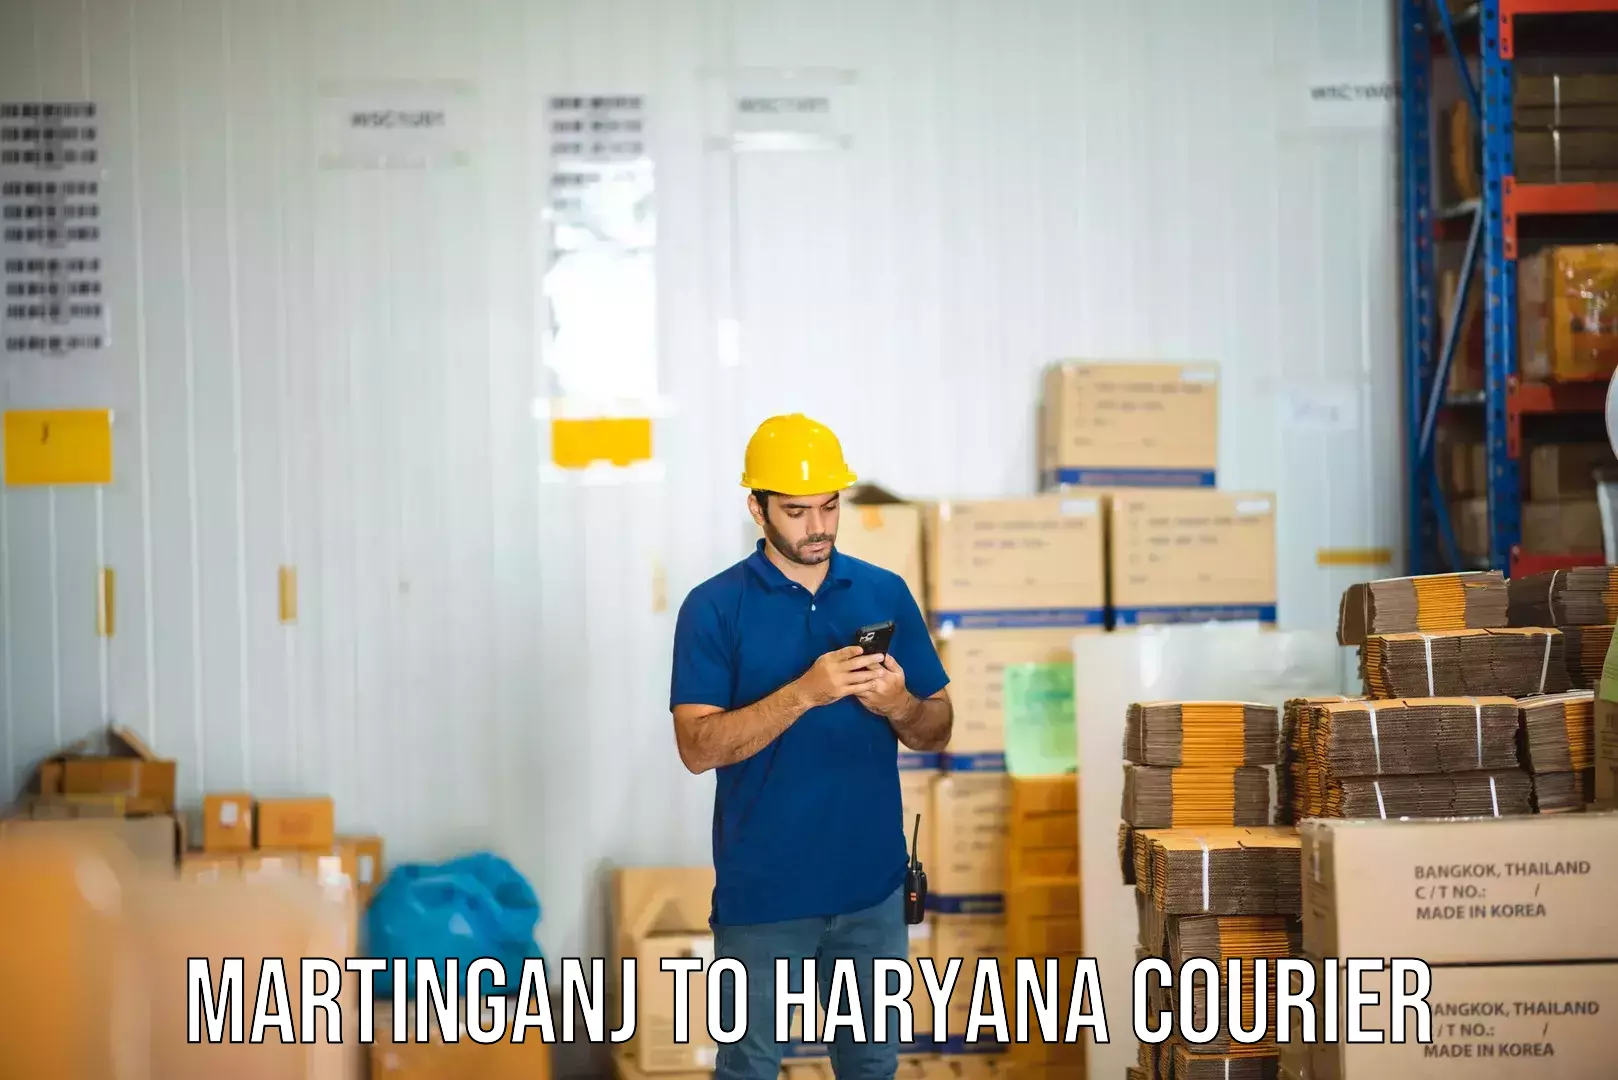 State-of-the-art courier technology Martinganj to Bhuna